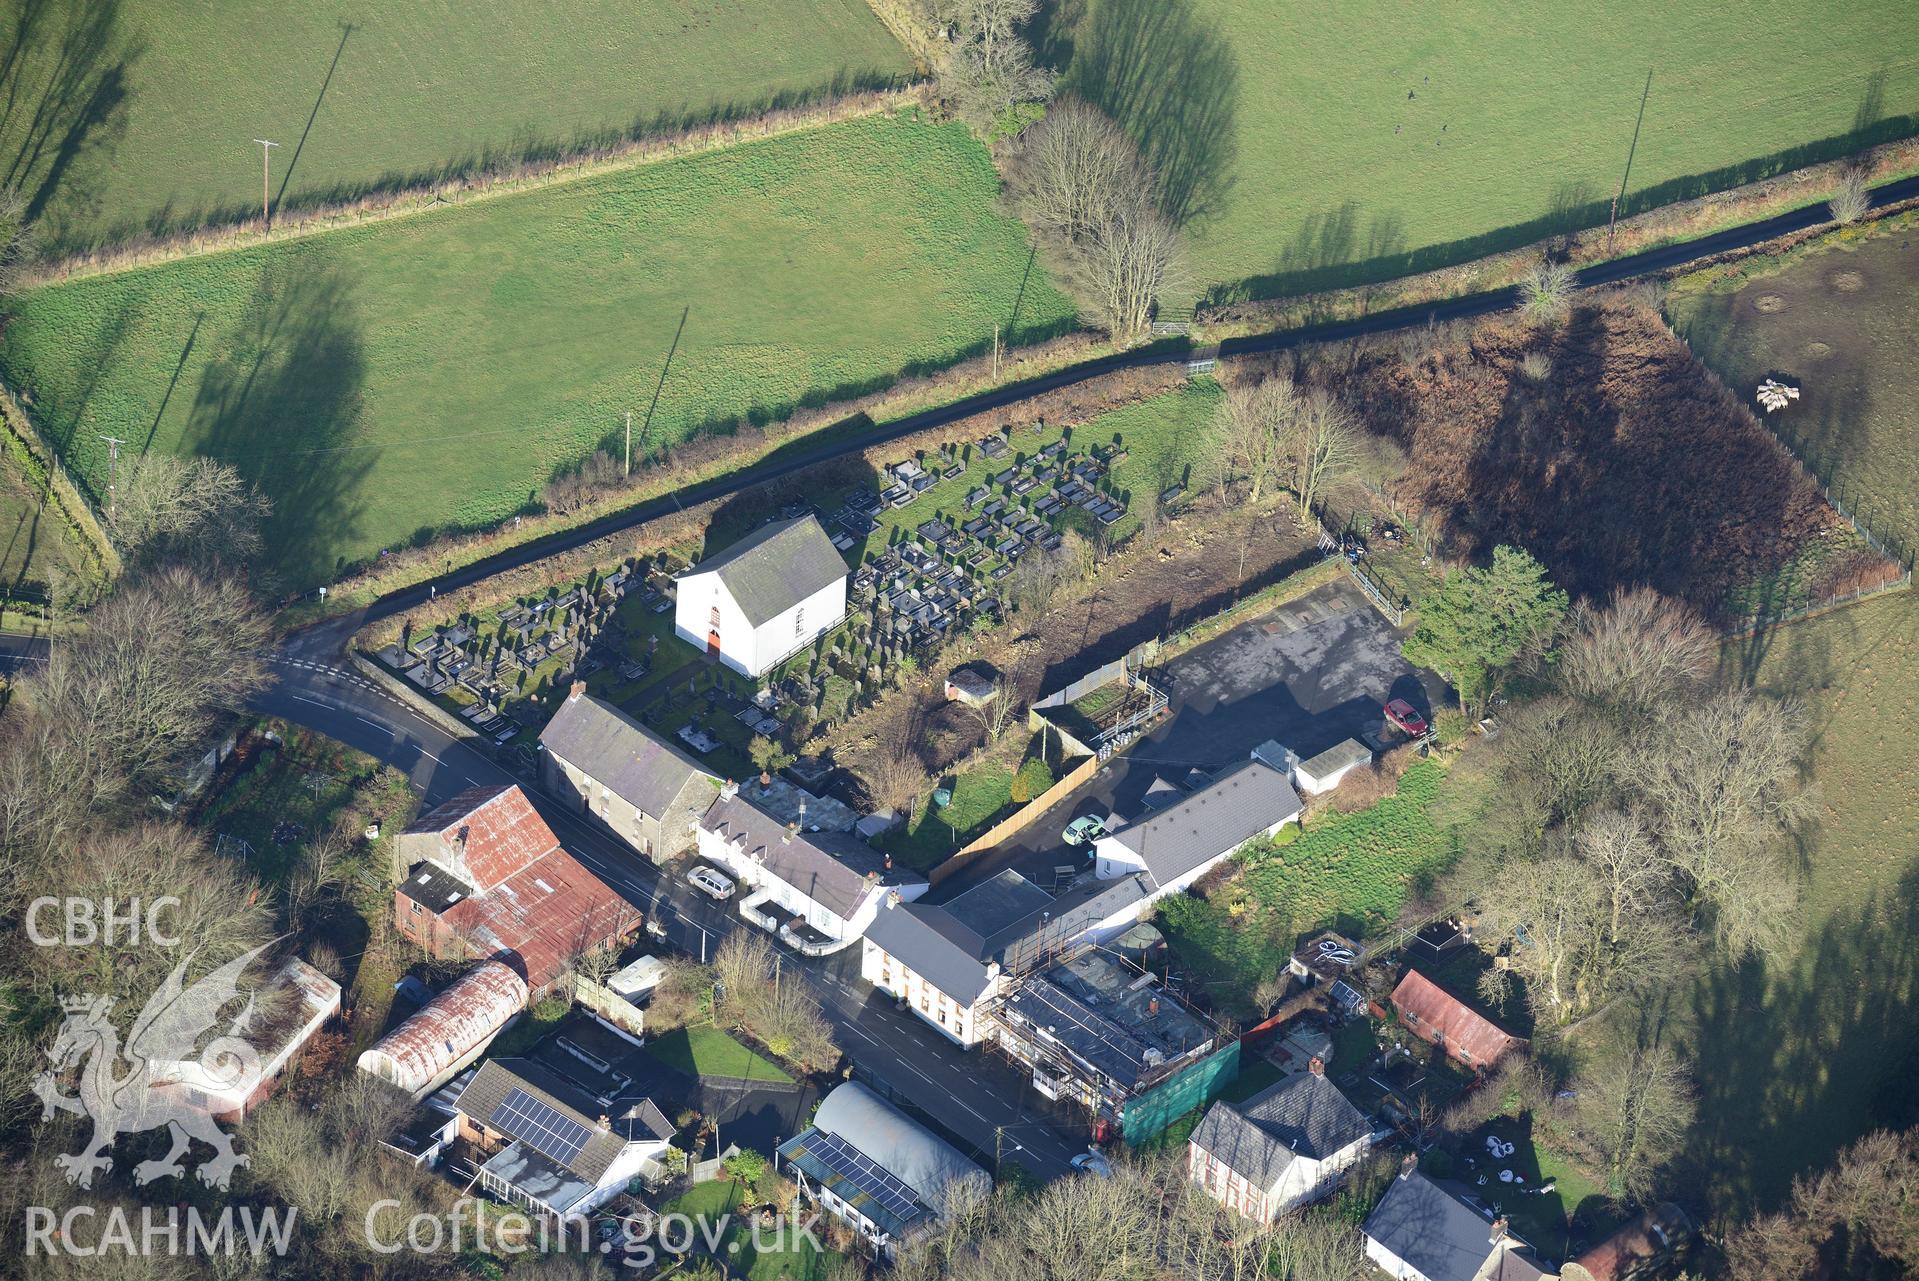 Cribyn village and Welsh Unitarian Chapel. Oblique aerial photograph taken during the Royal Commission's programme of archaeological aerial reconnaissance by Toby Driver on 6th January 2015.